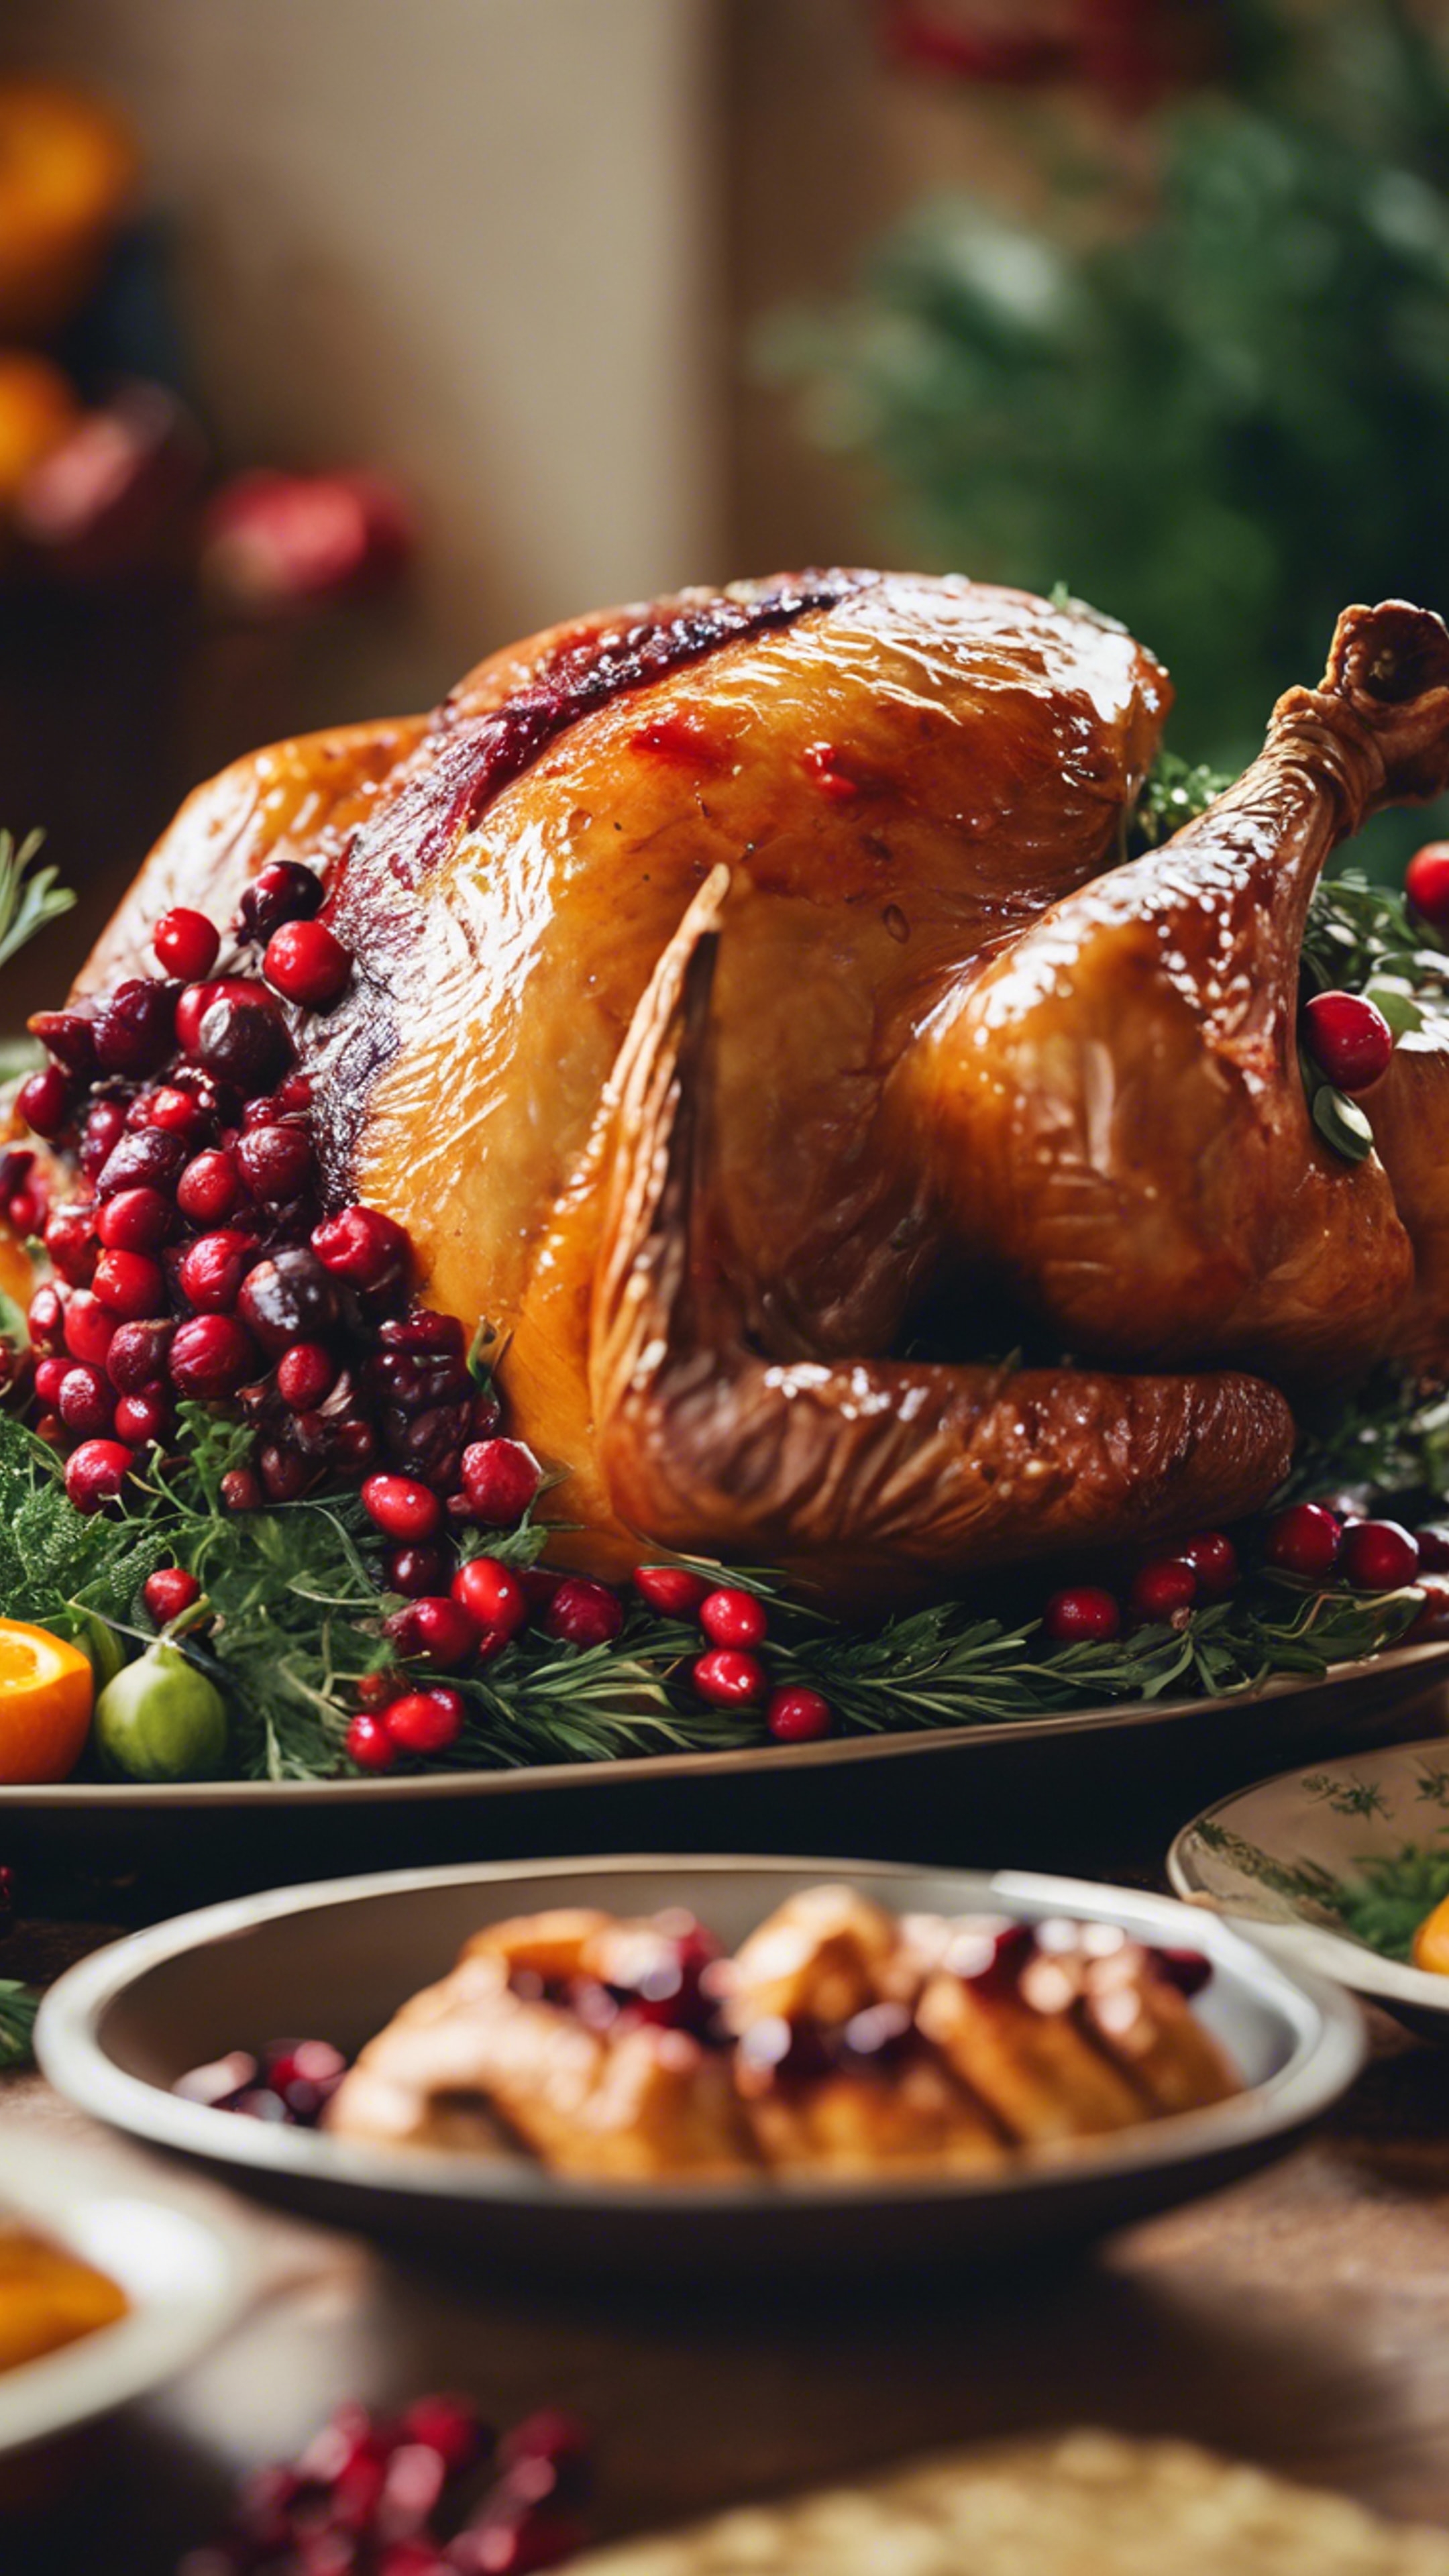 An artistic close-up of a traditional roast turkey on a Thanksgiving table, garnished with cranberries and herbs. Wallpaper[f7ada081b7d5471b890d]